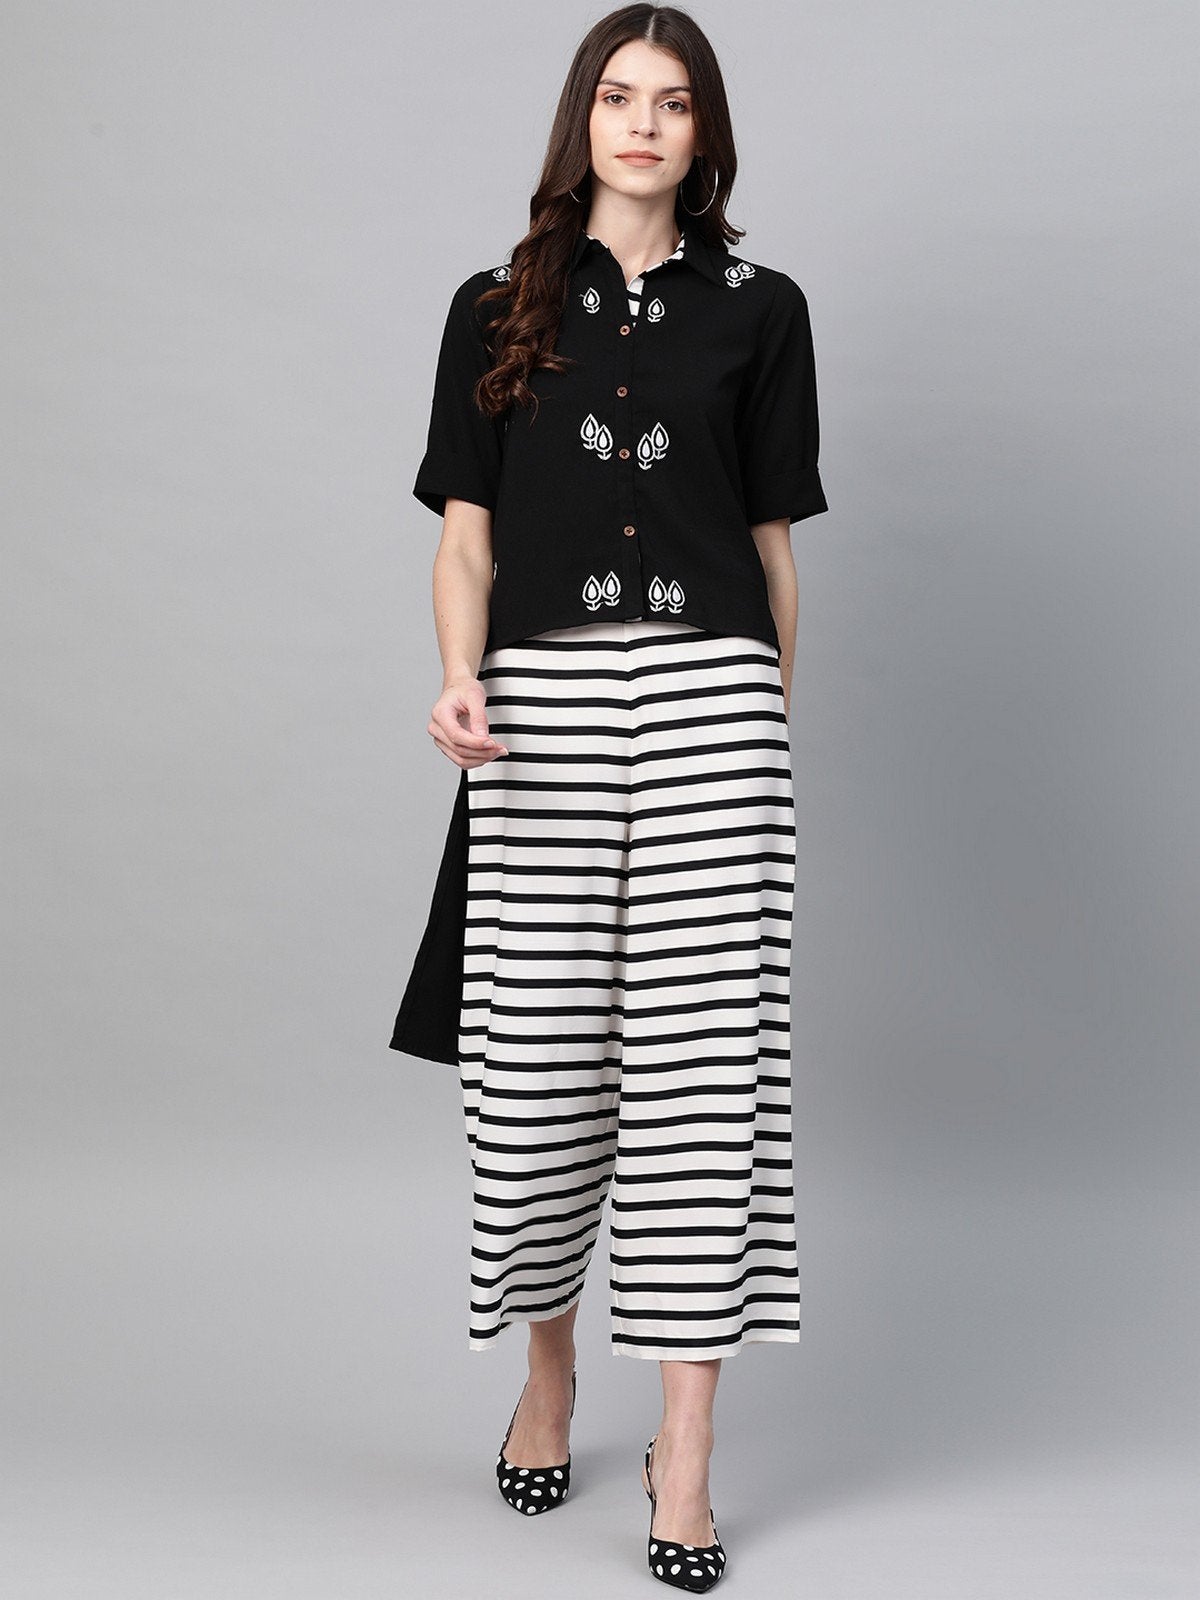 Women's Solid Embroidered Top With Stripe Pants - Pannkh